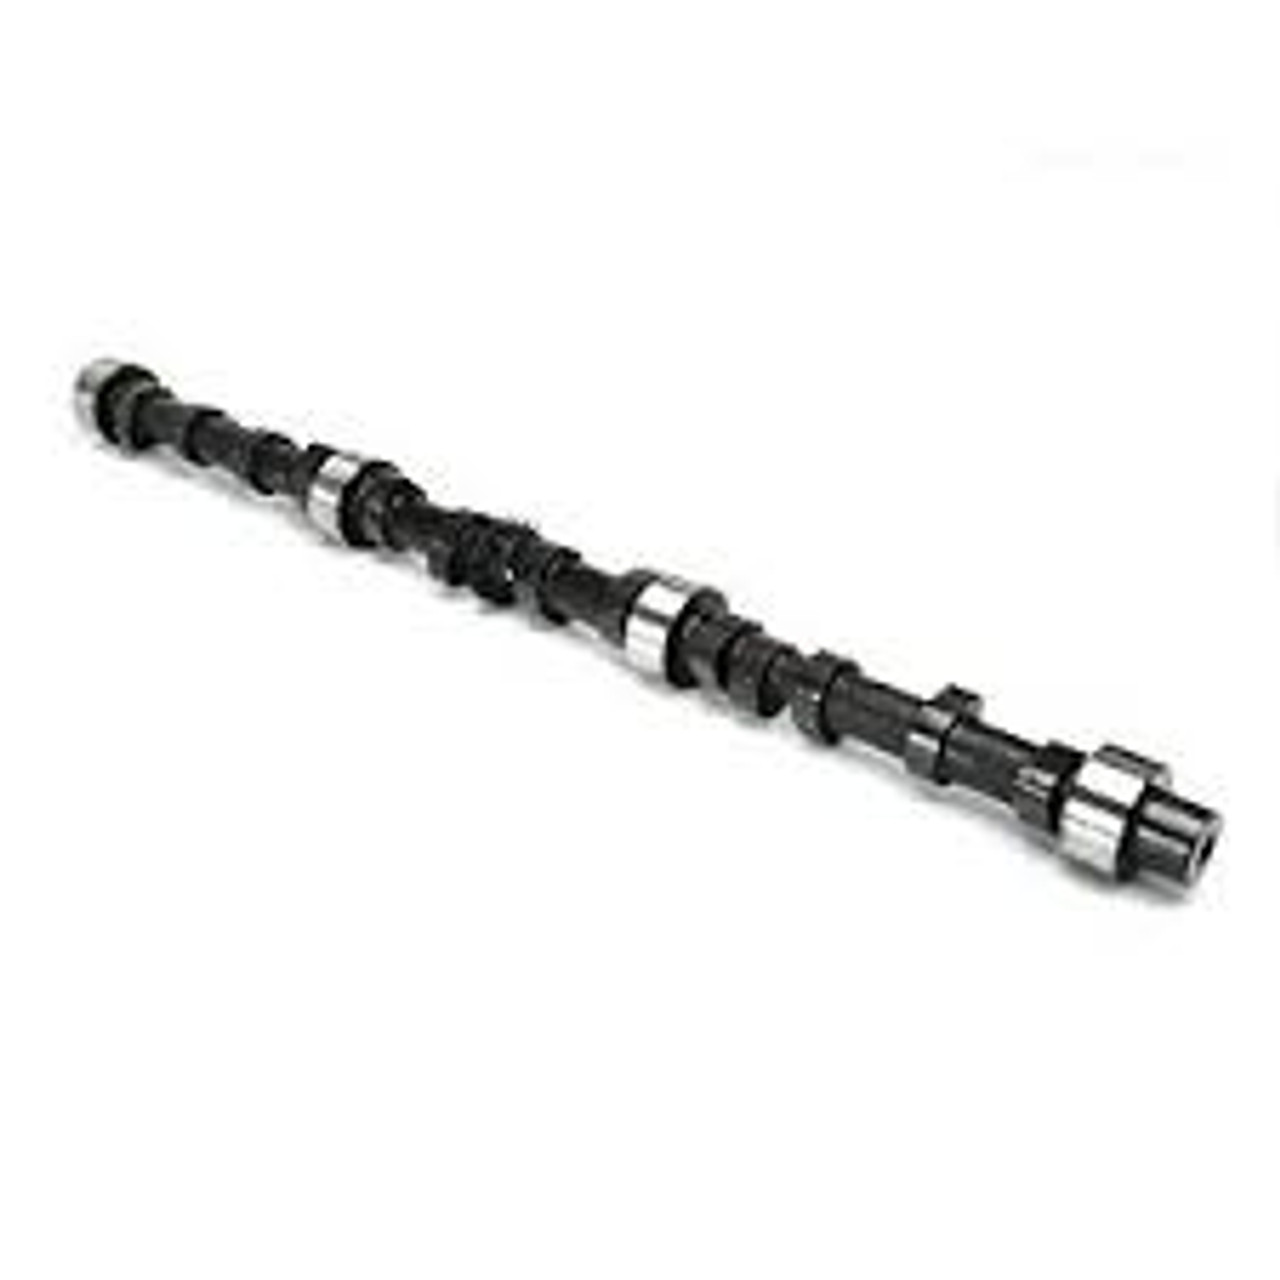 C-292-12-B (This single pattern high lift, high duration camshaft is recommended for turbo charged application Only)Ford 144,170,200,250